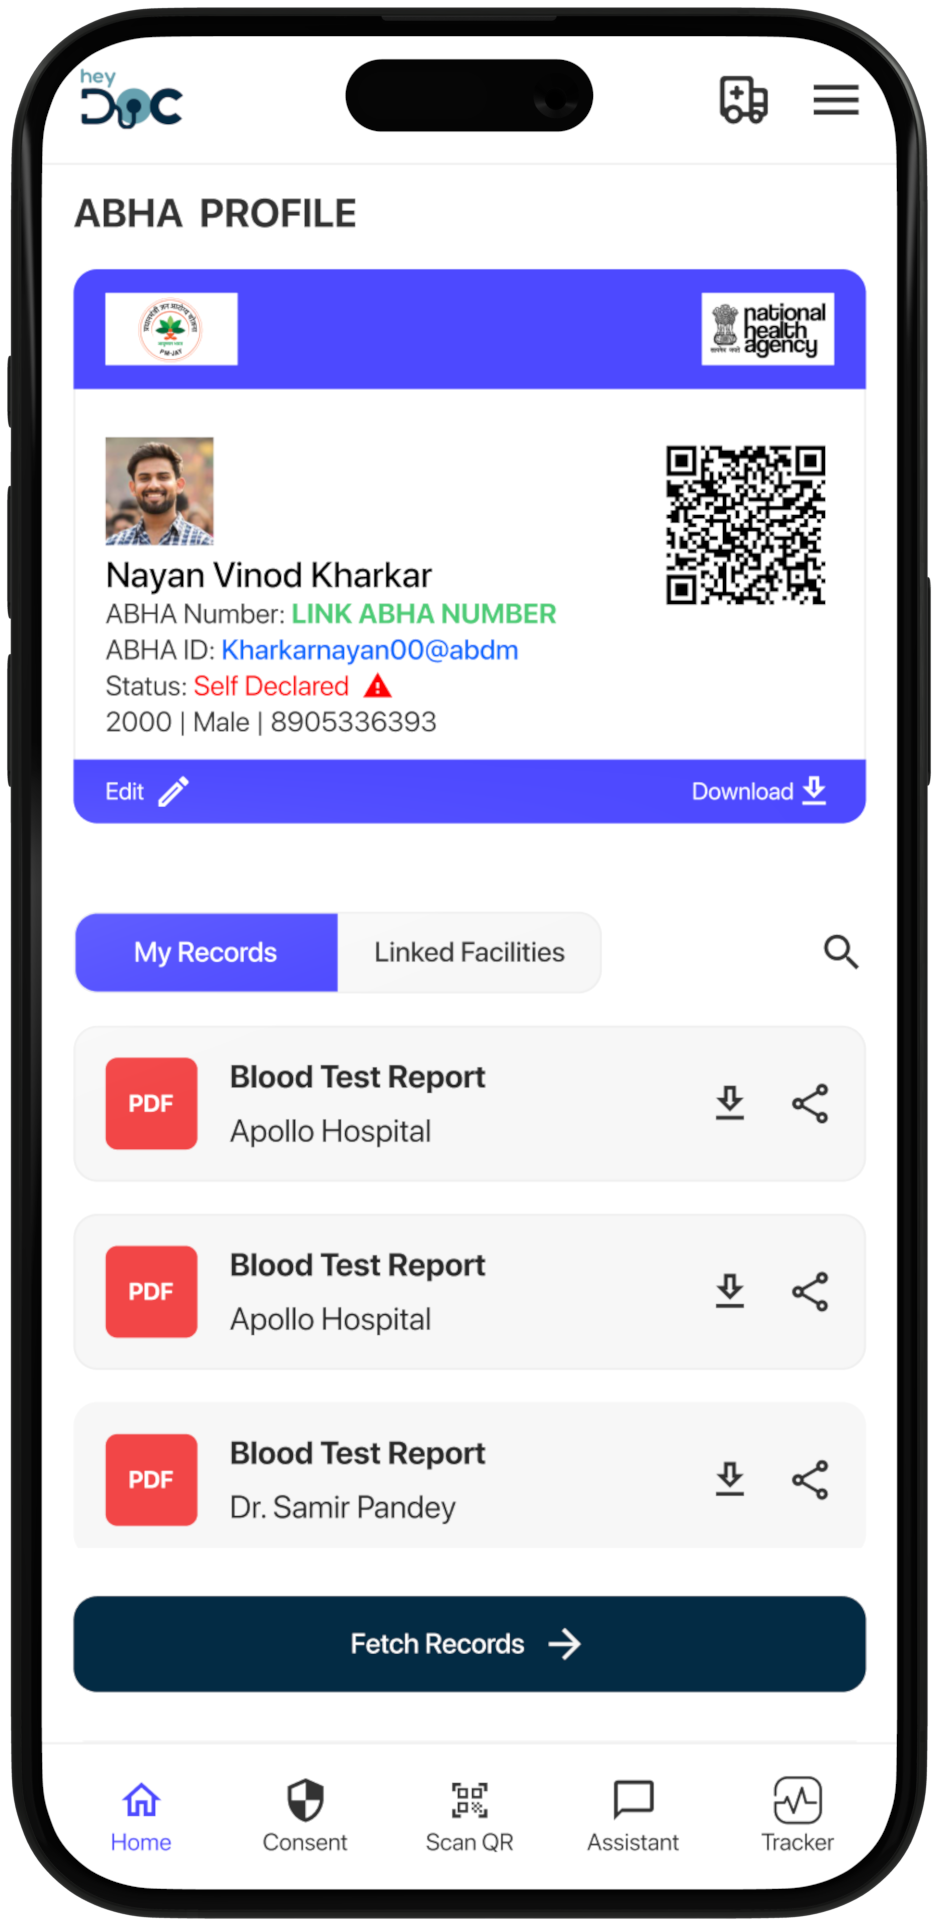 Personalized Healthcare Plans by HeyDoc AI's WellnessGPT